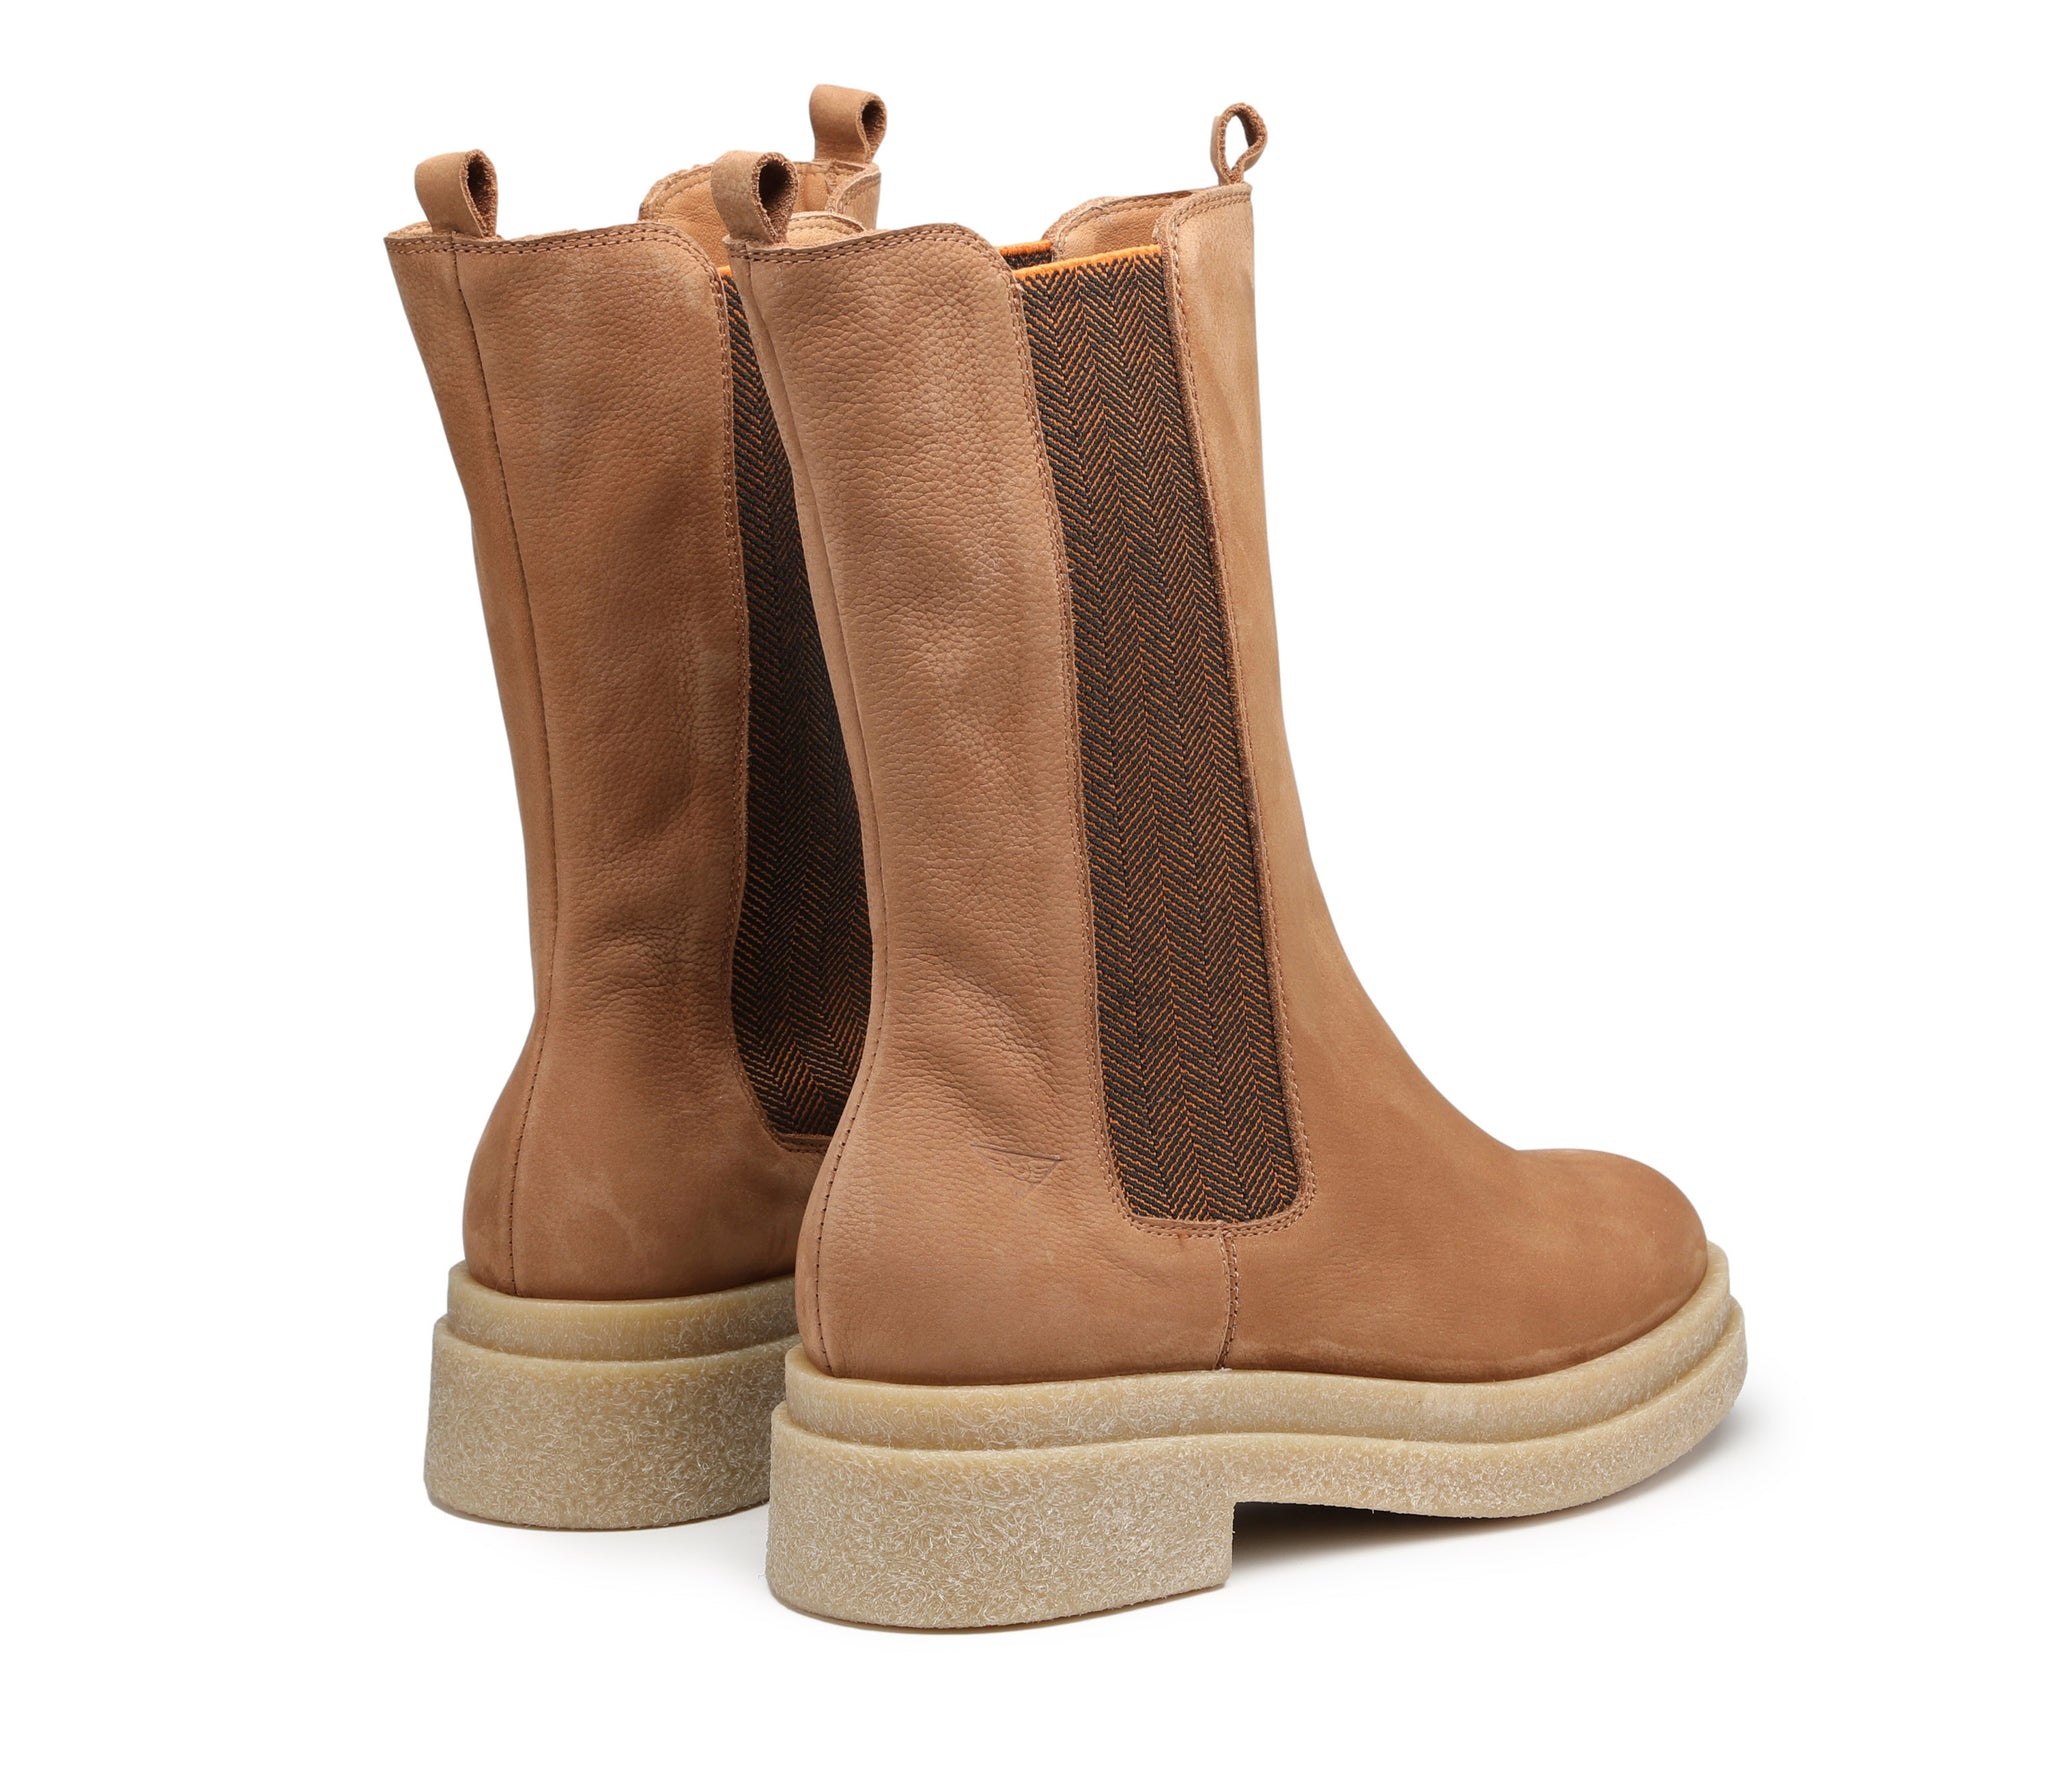 Women's Nubuck Boots with Rubber Sole